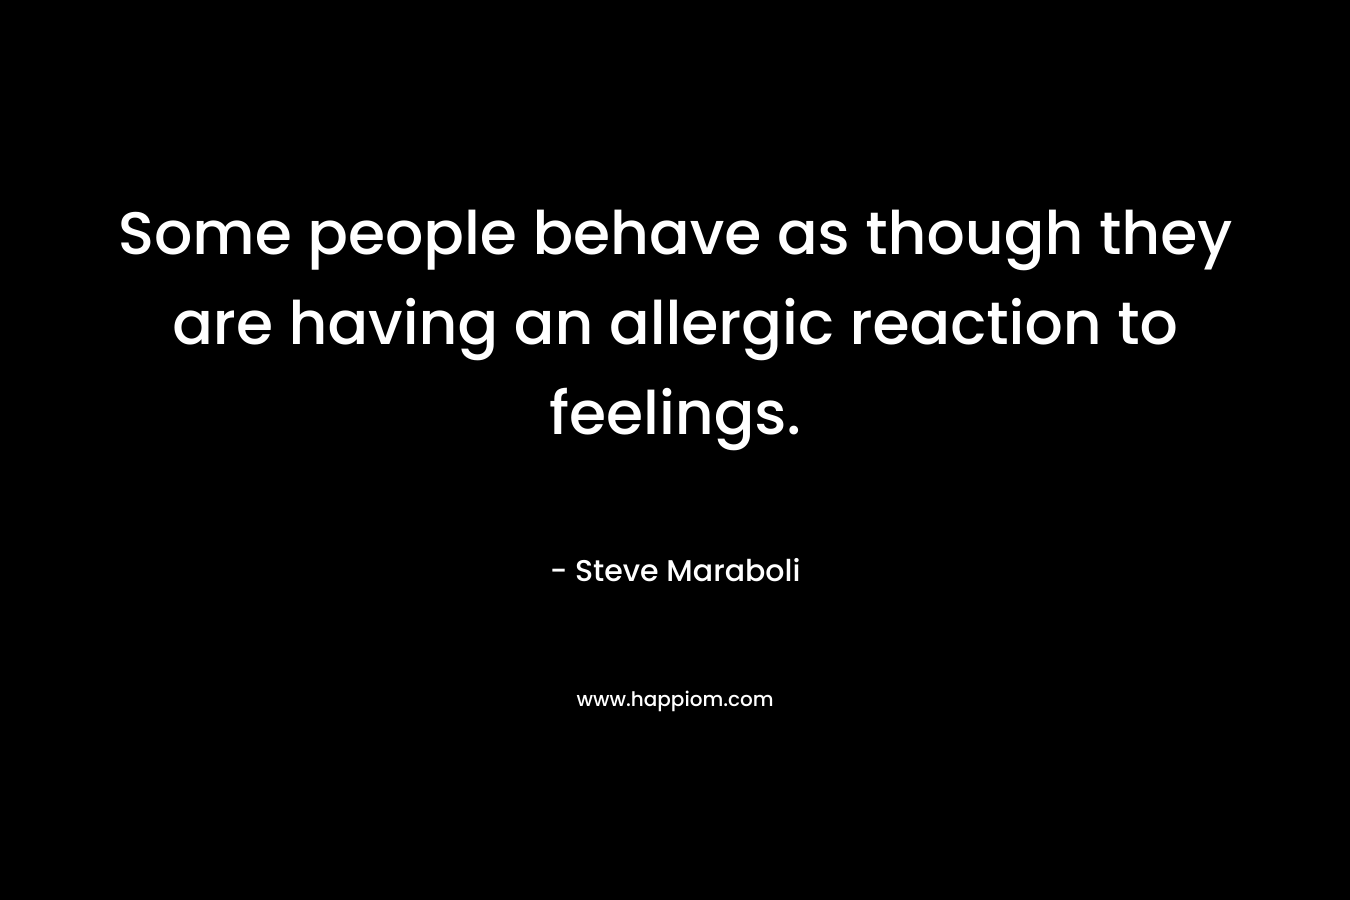 Some people behave as though they are having an allergic reaction to feelings.